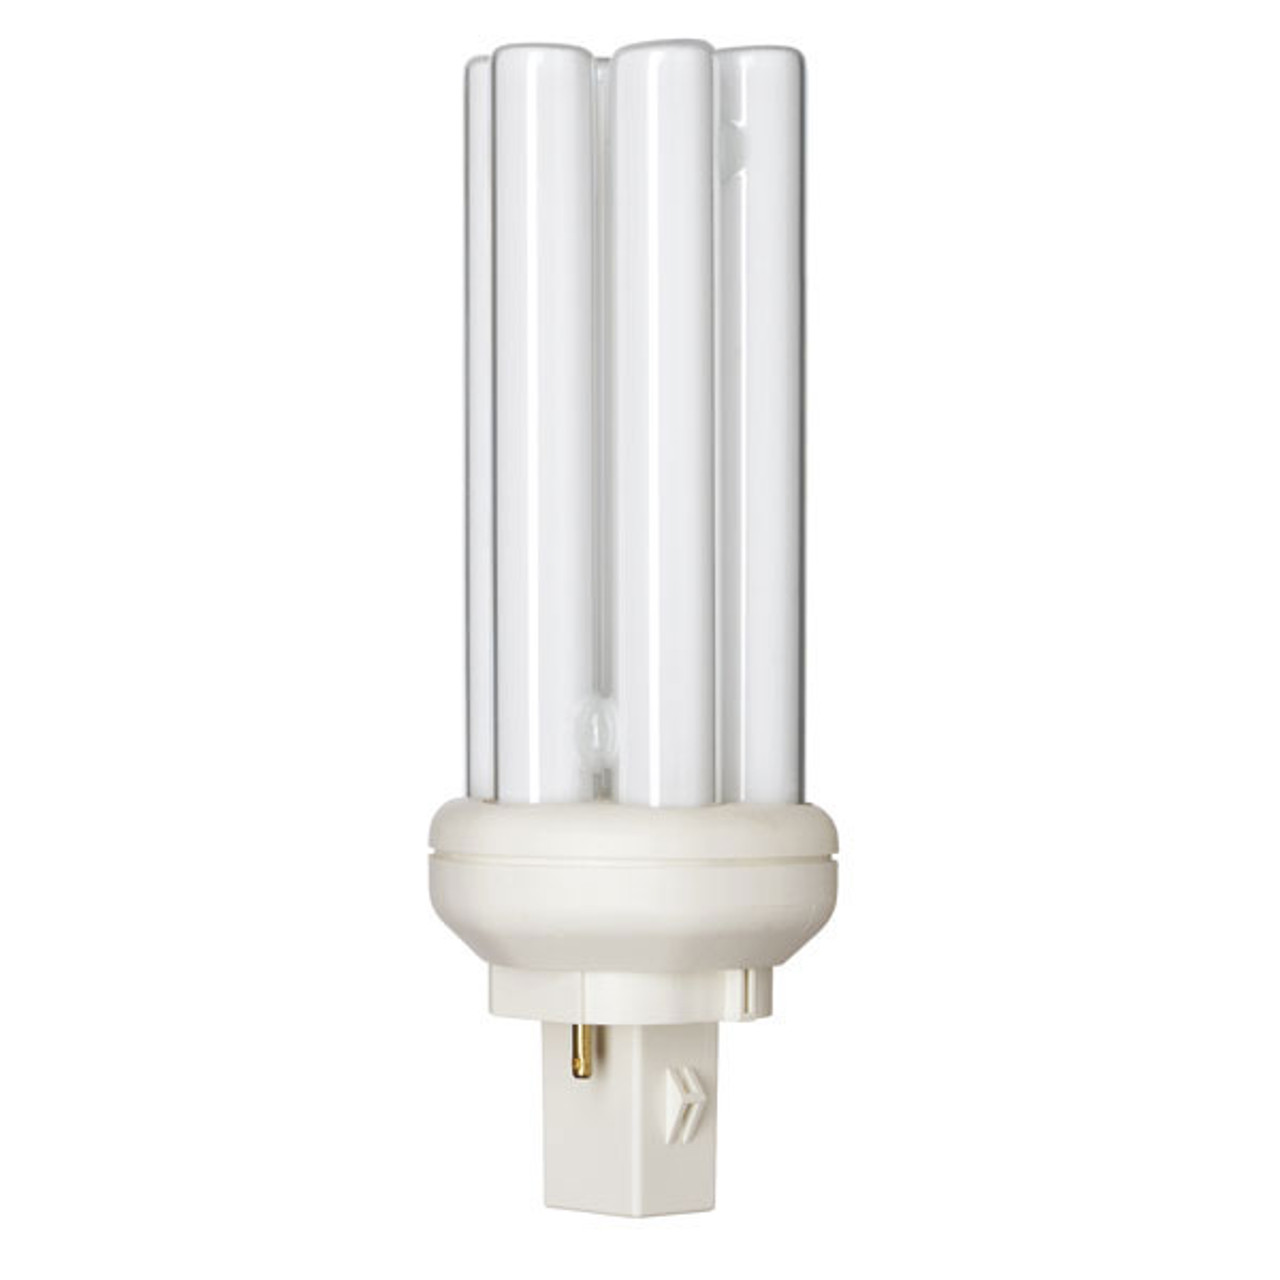 Philips PL-T 26W 2-Pin 840 Cool White